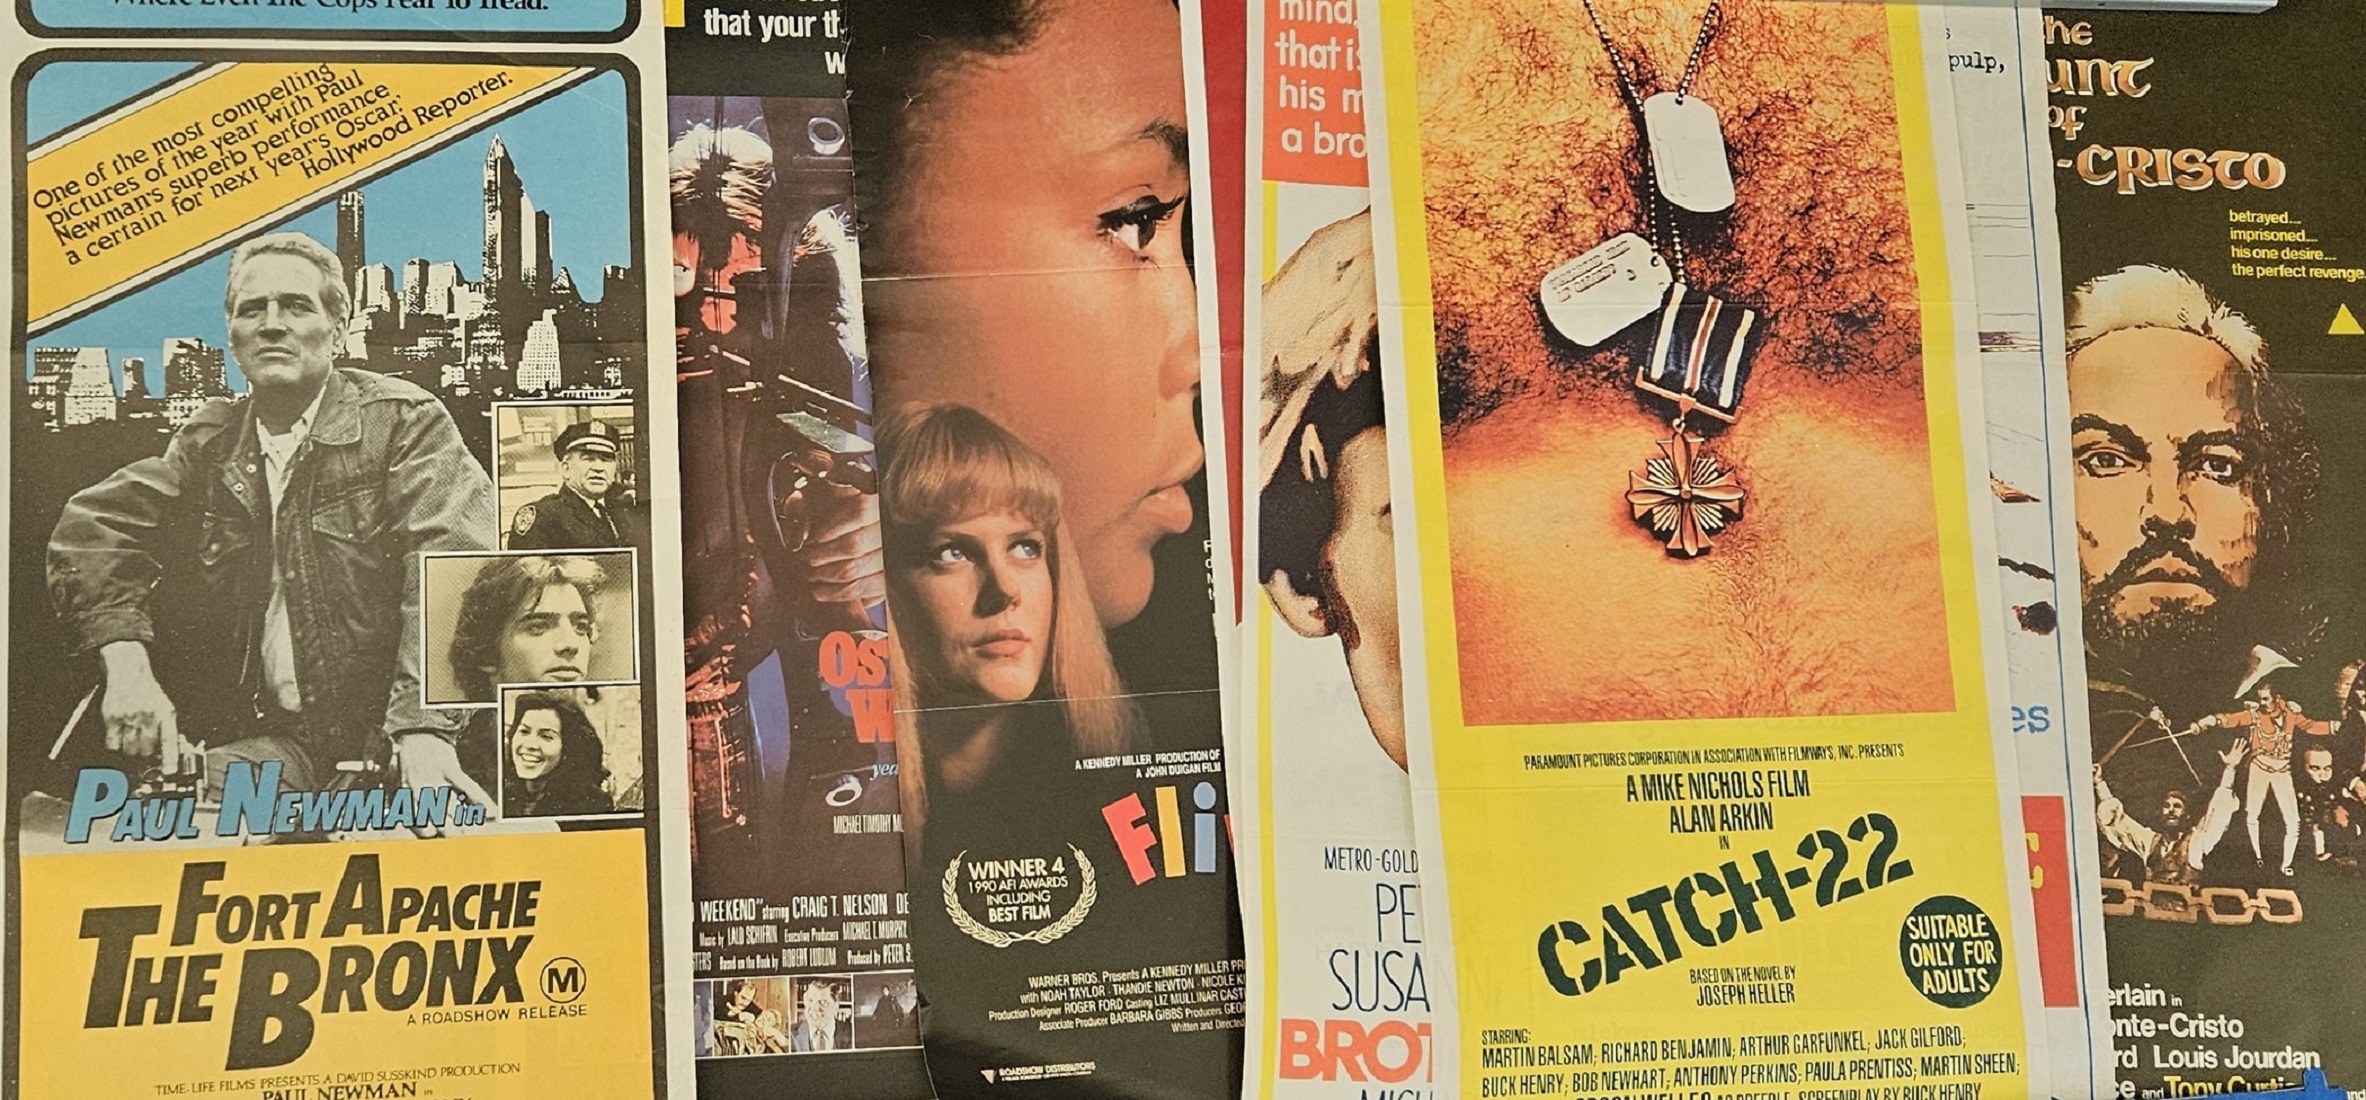 FILM Poster collection of 8 approx 13x30 inch movie posters. Good condition. All autographs are